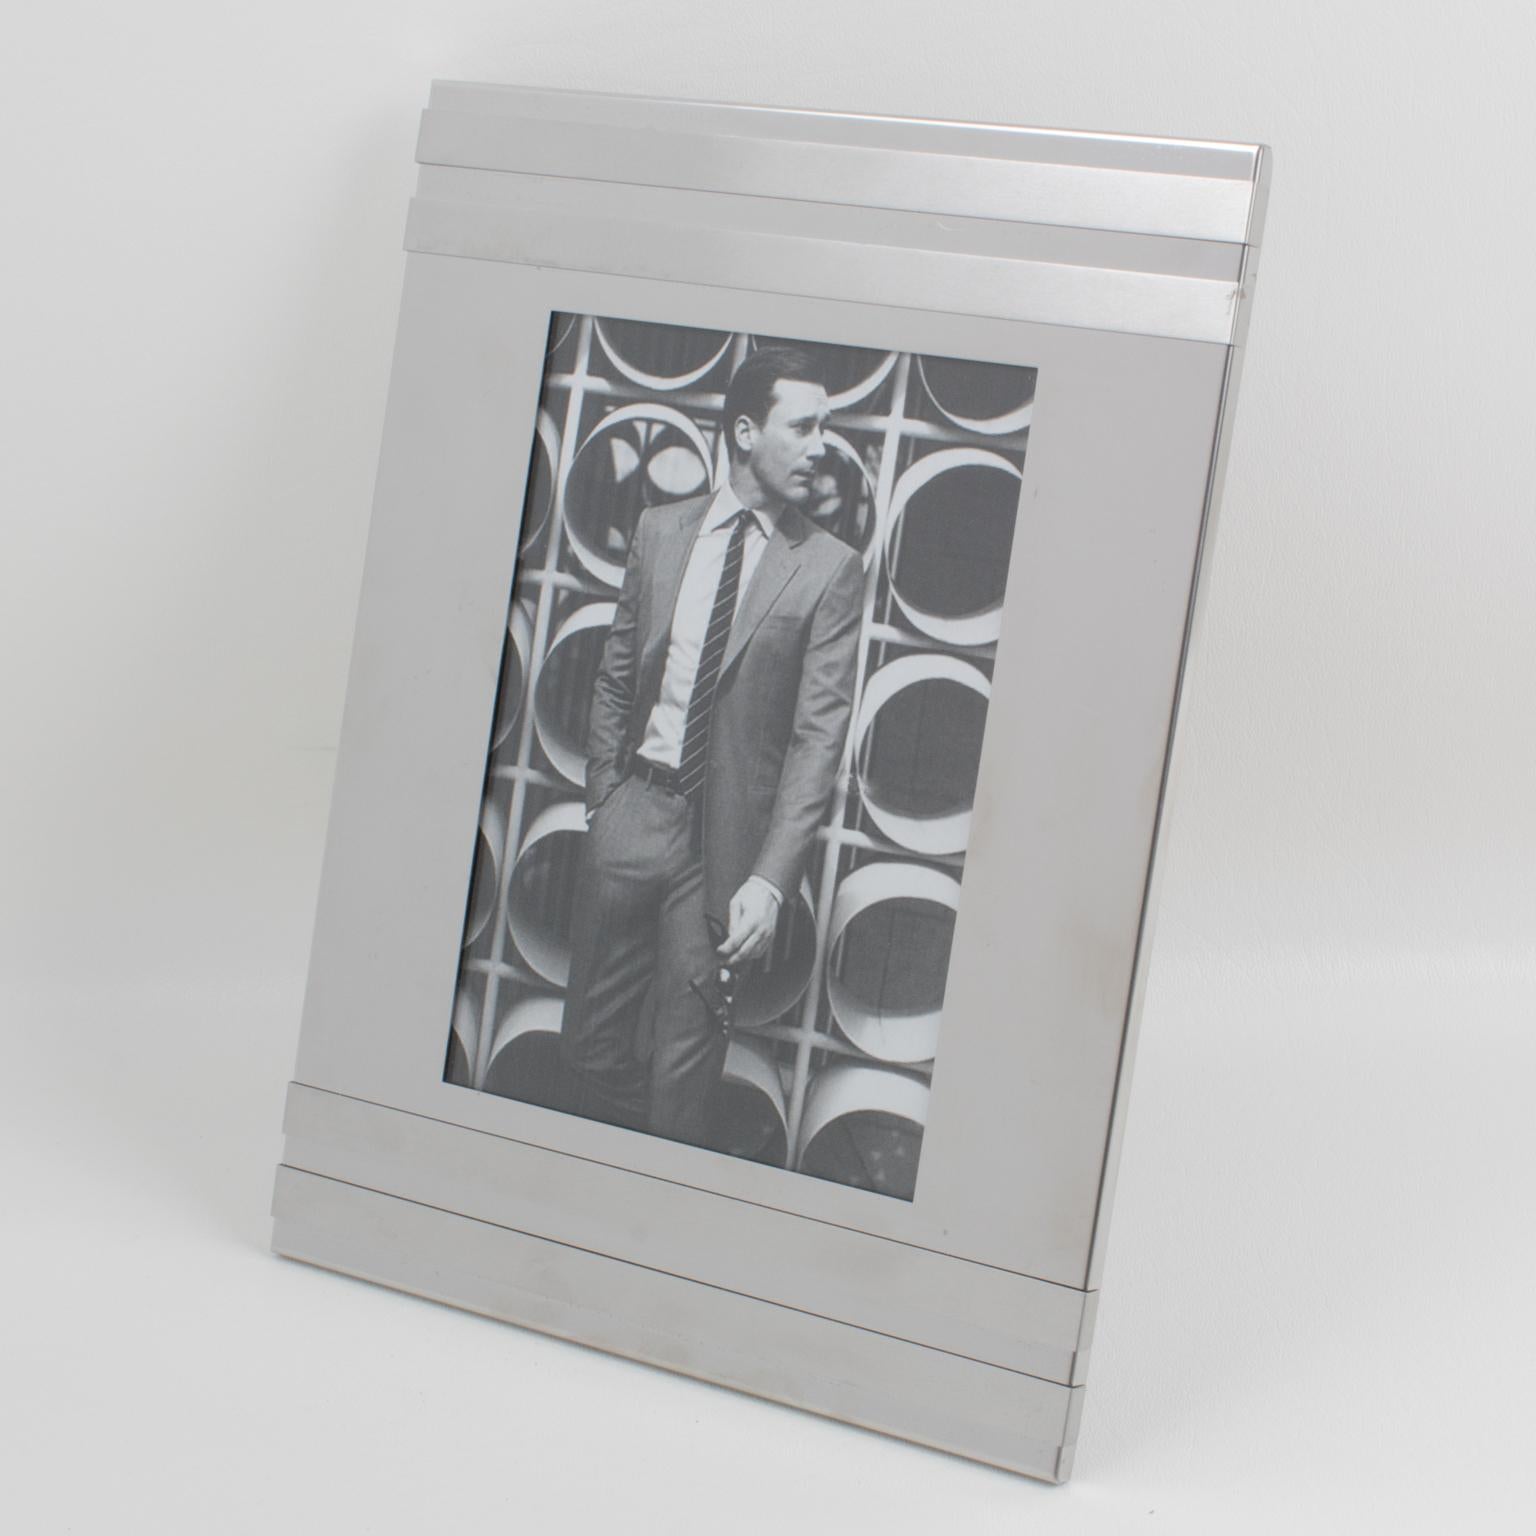 Sophisticated 1970s Italian modern picture photo frame. Rectangular shape with geometric design in shiny and brushed silver aluminum. Back and easel in black paper with a textured pattern. No visible maker's mark.
Measurements:
Overall: 8.07 in.